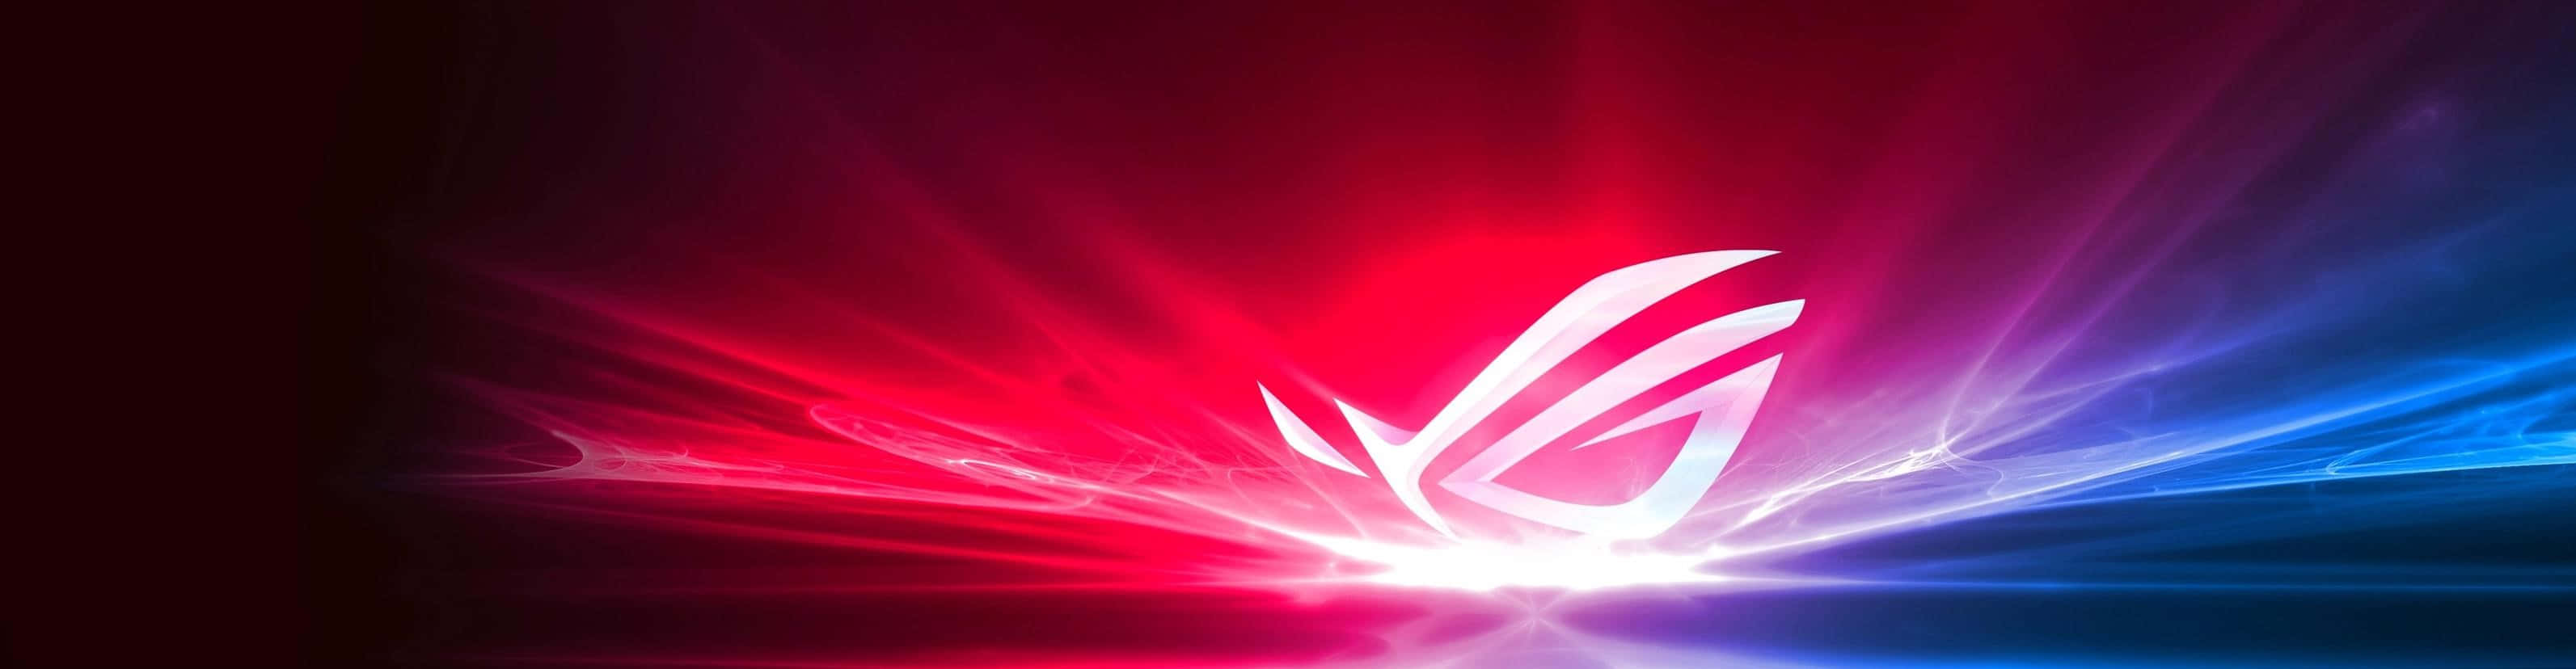 Asus Rog Logo On A Blue And Red Background Wallpaper